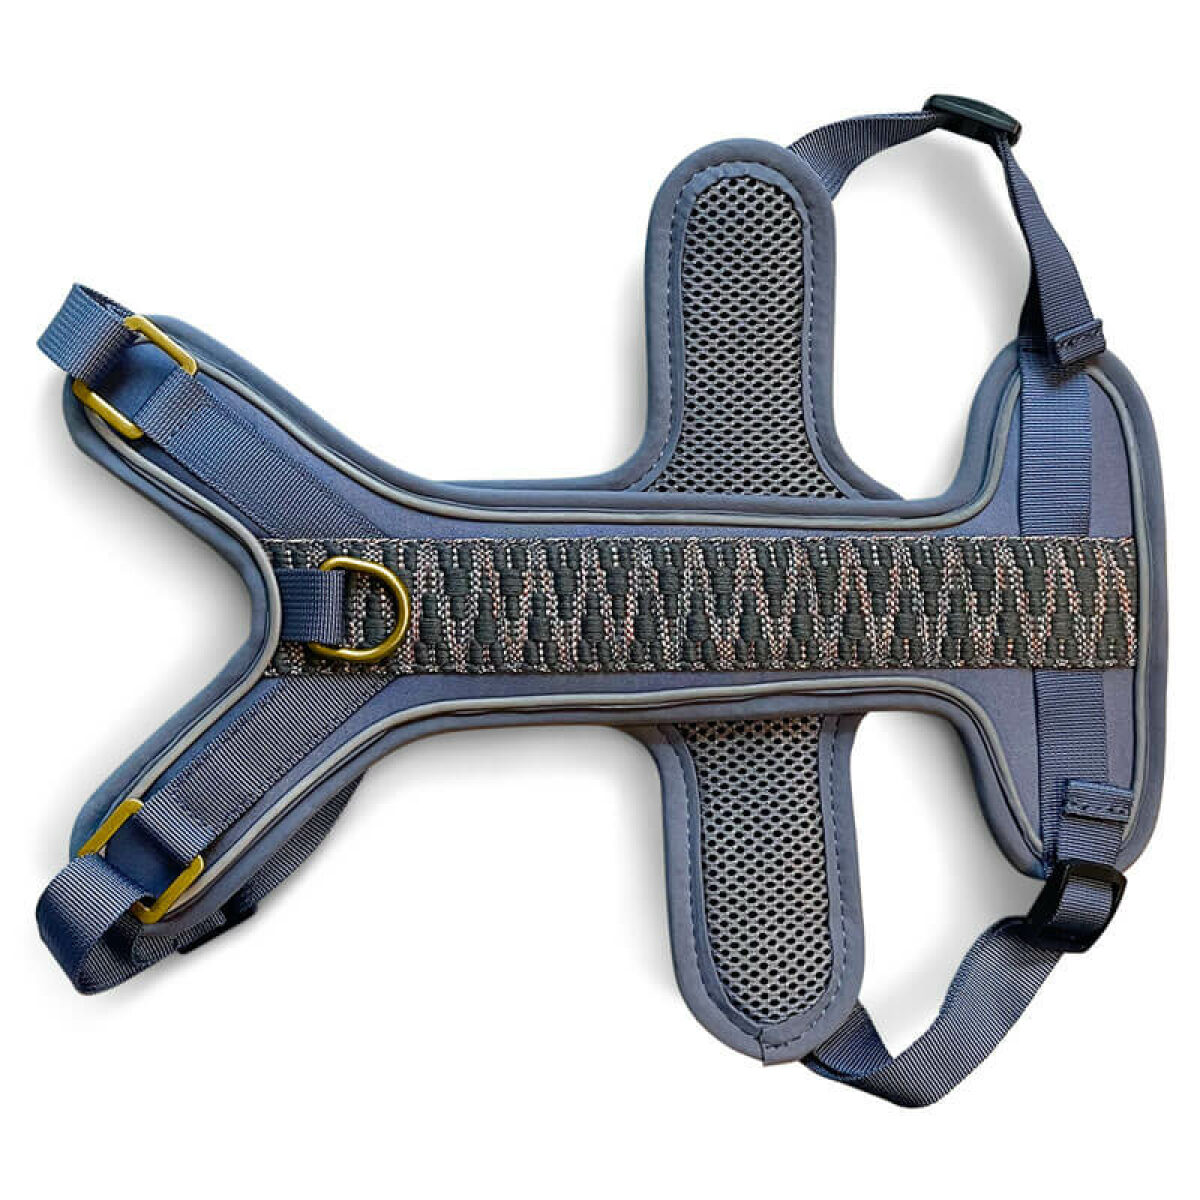 Premium dog harness padded Tres Chic in blue/grey front